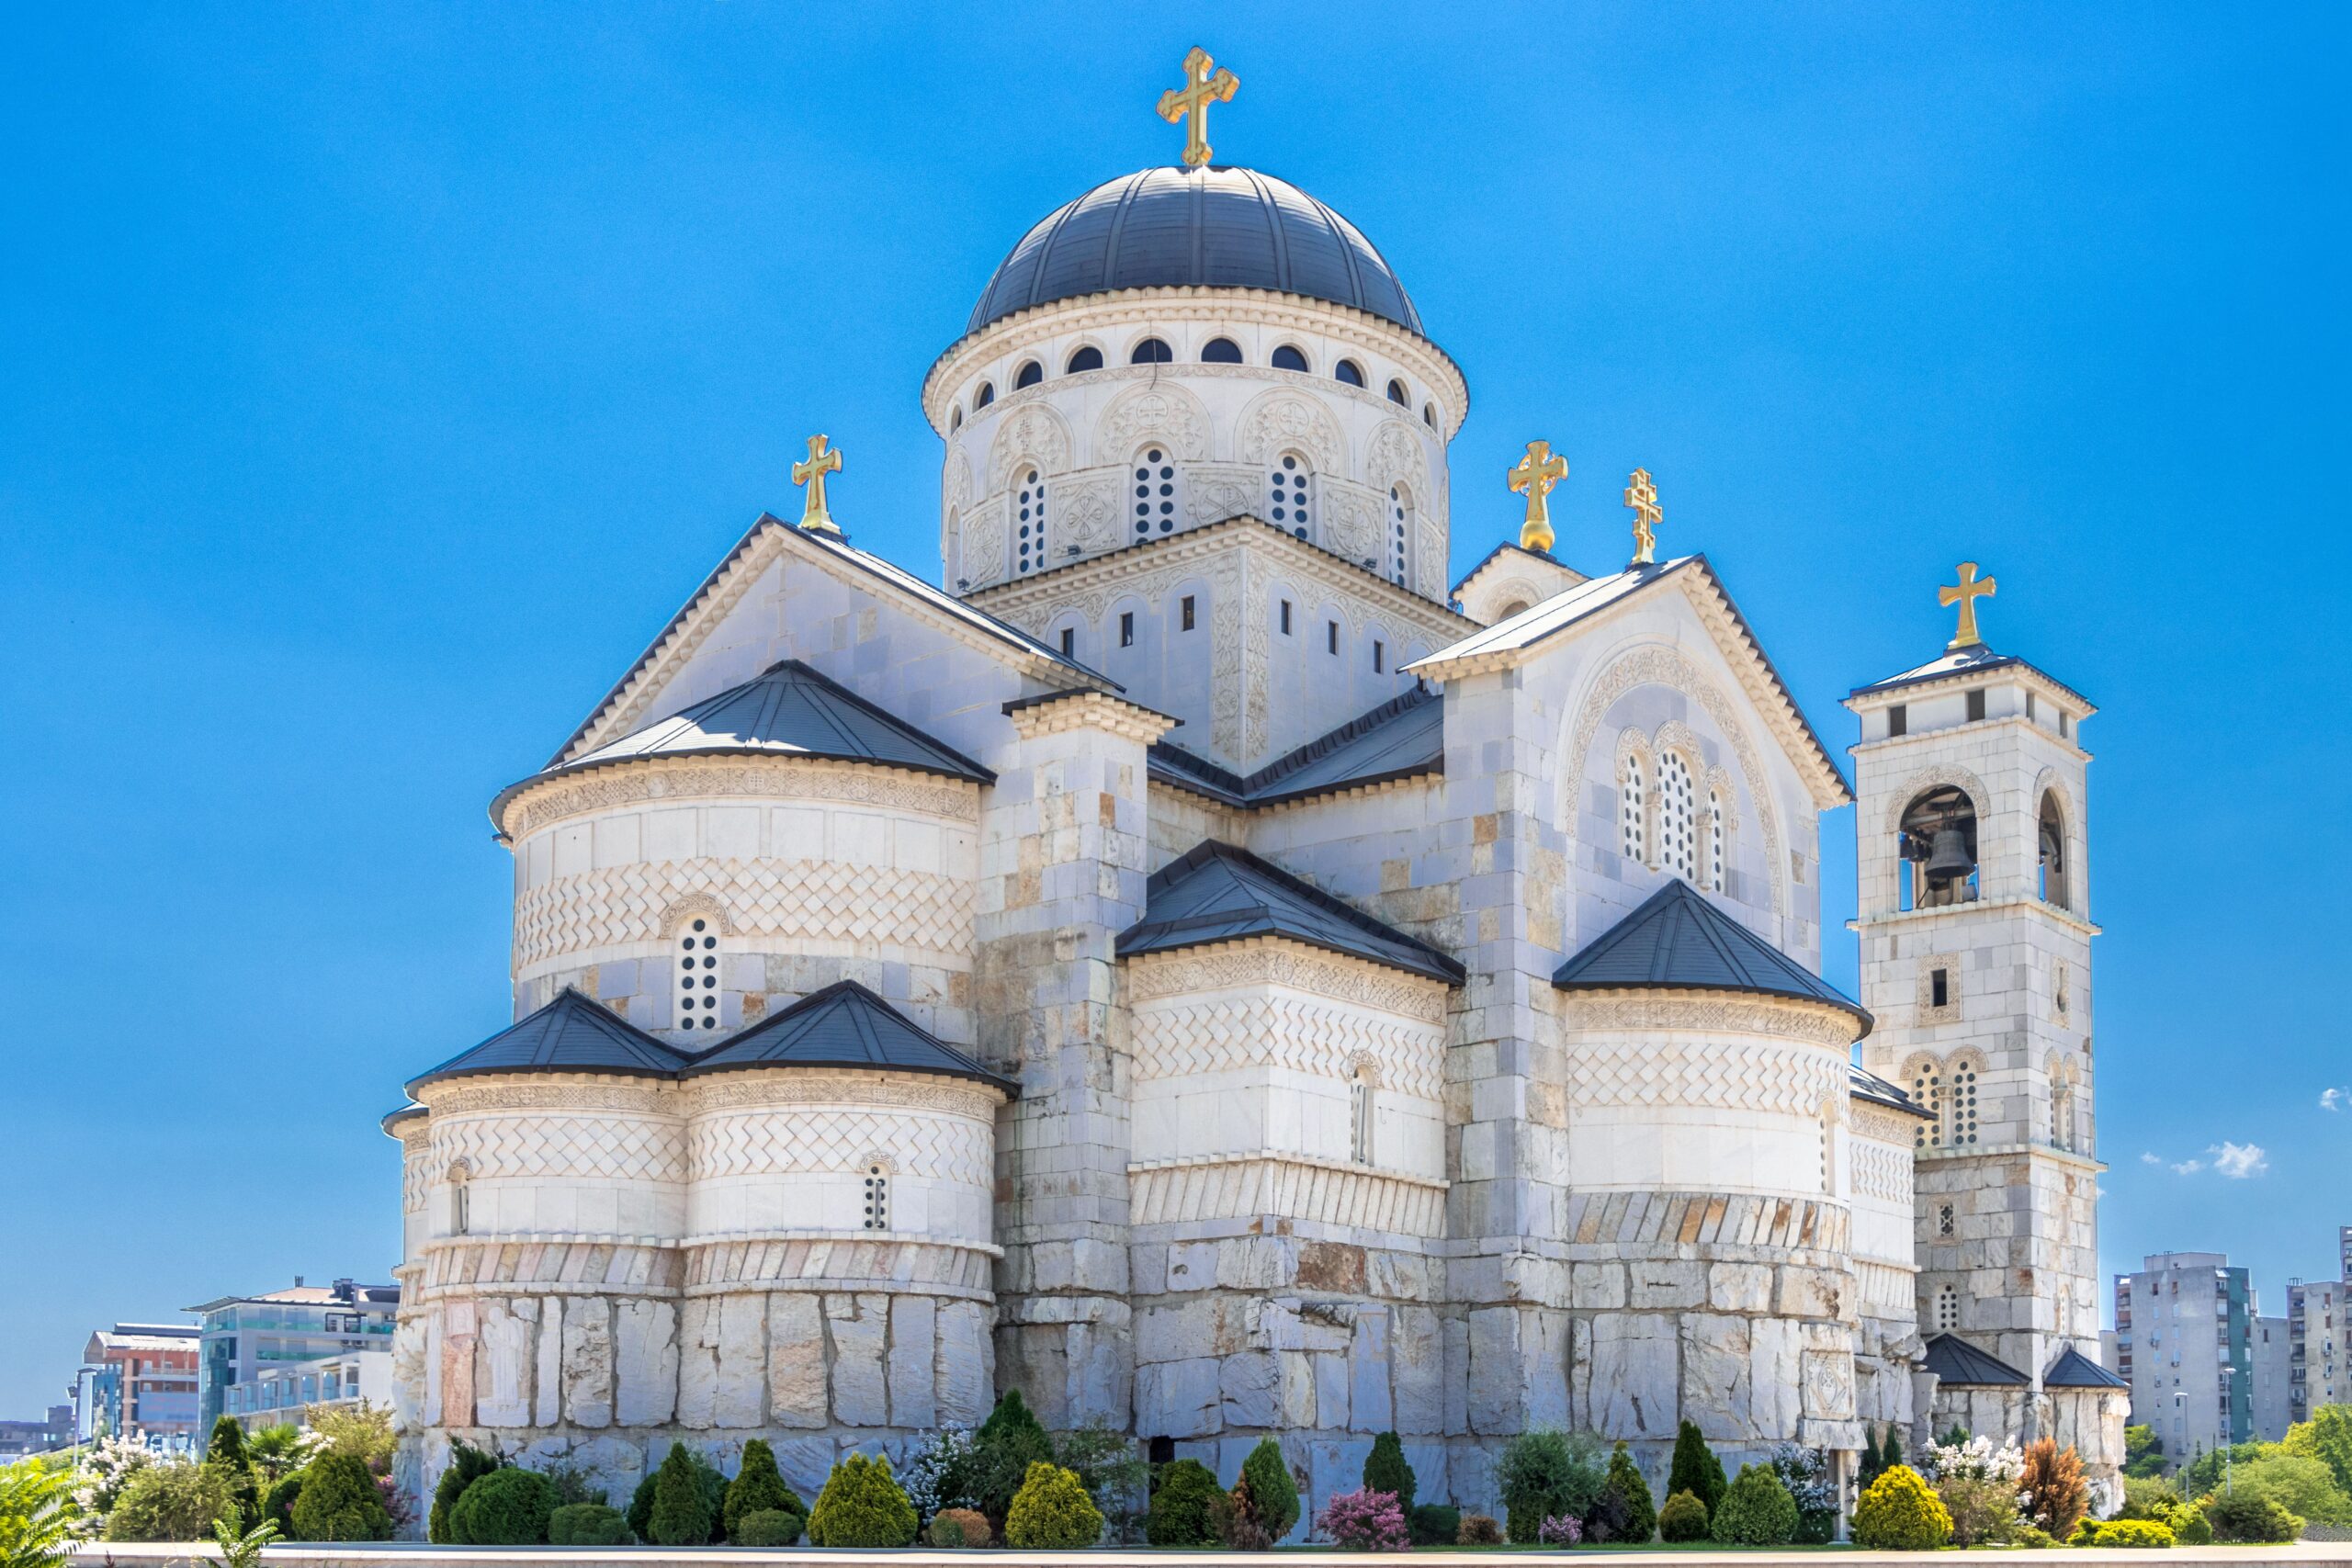 Podgorica Cathedral of Christ’s Resurrection